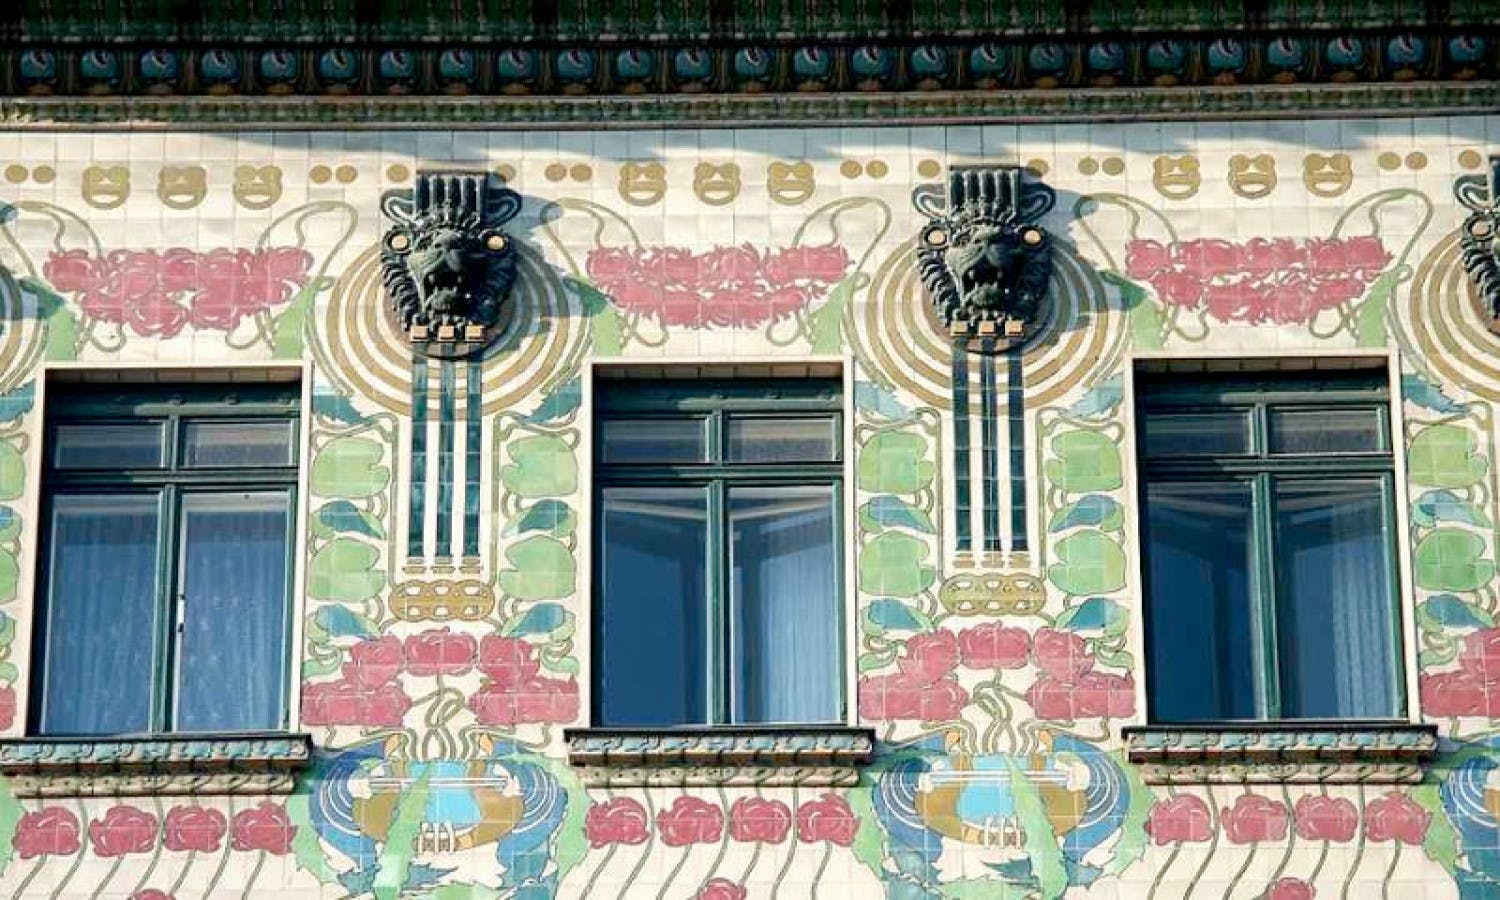 Vienna Art Nouveau: Otto Wagner and the City Trains - 3-Hour walk with a Historian